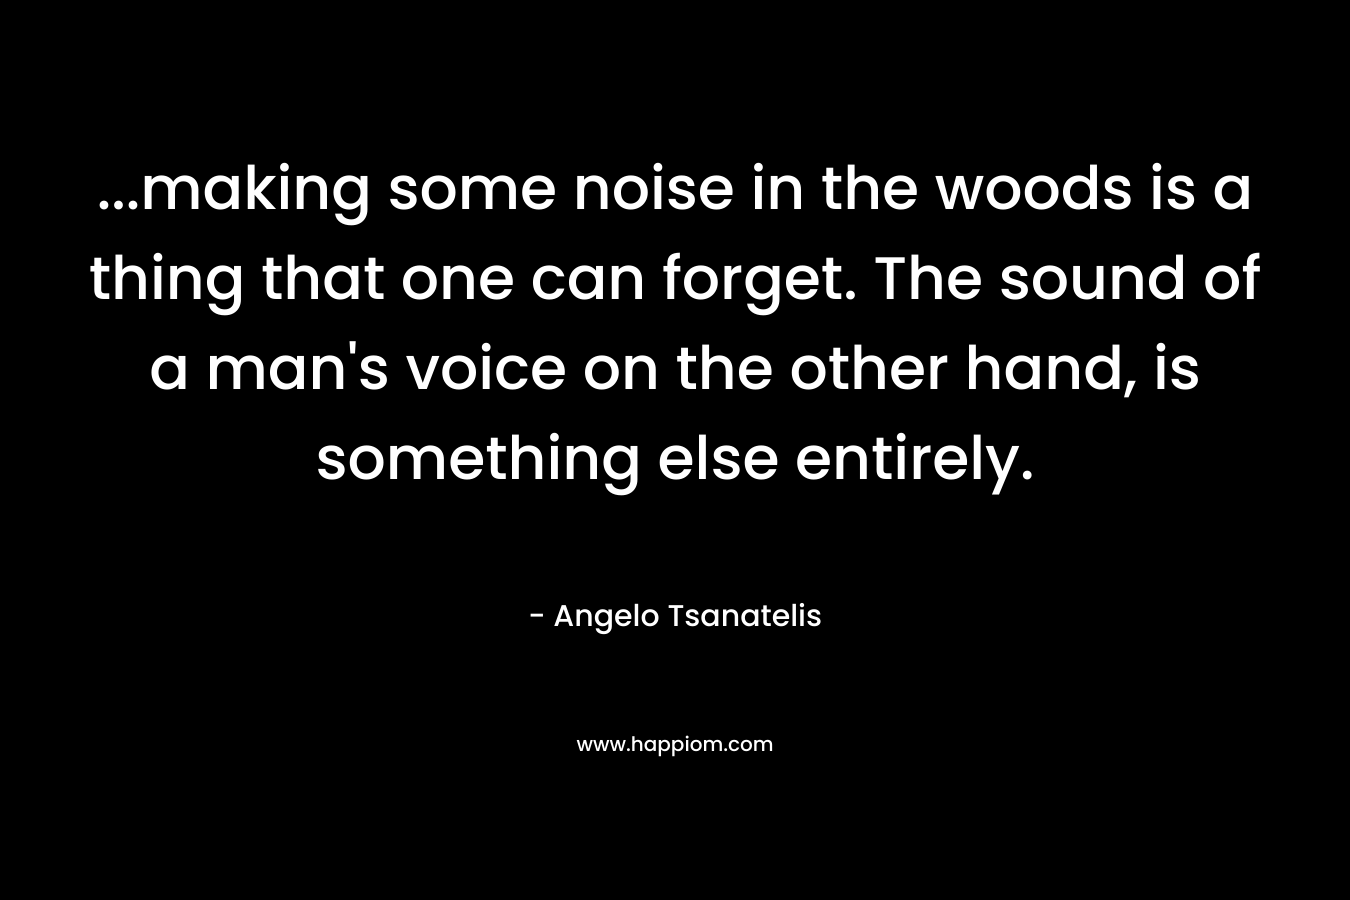 ...making some noise in the woods is a thing that one can forget. The sound of a man's voice on the other hand, is something else entirely.